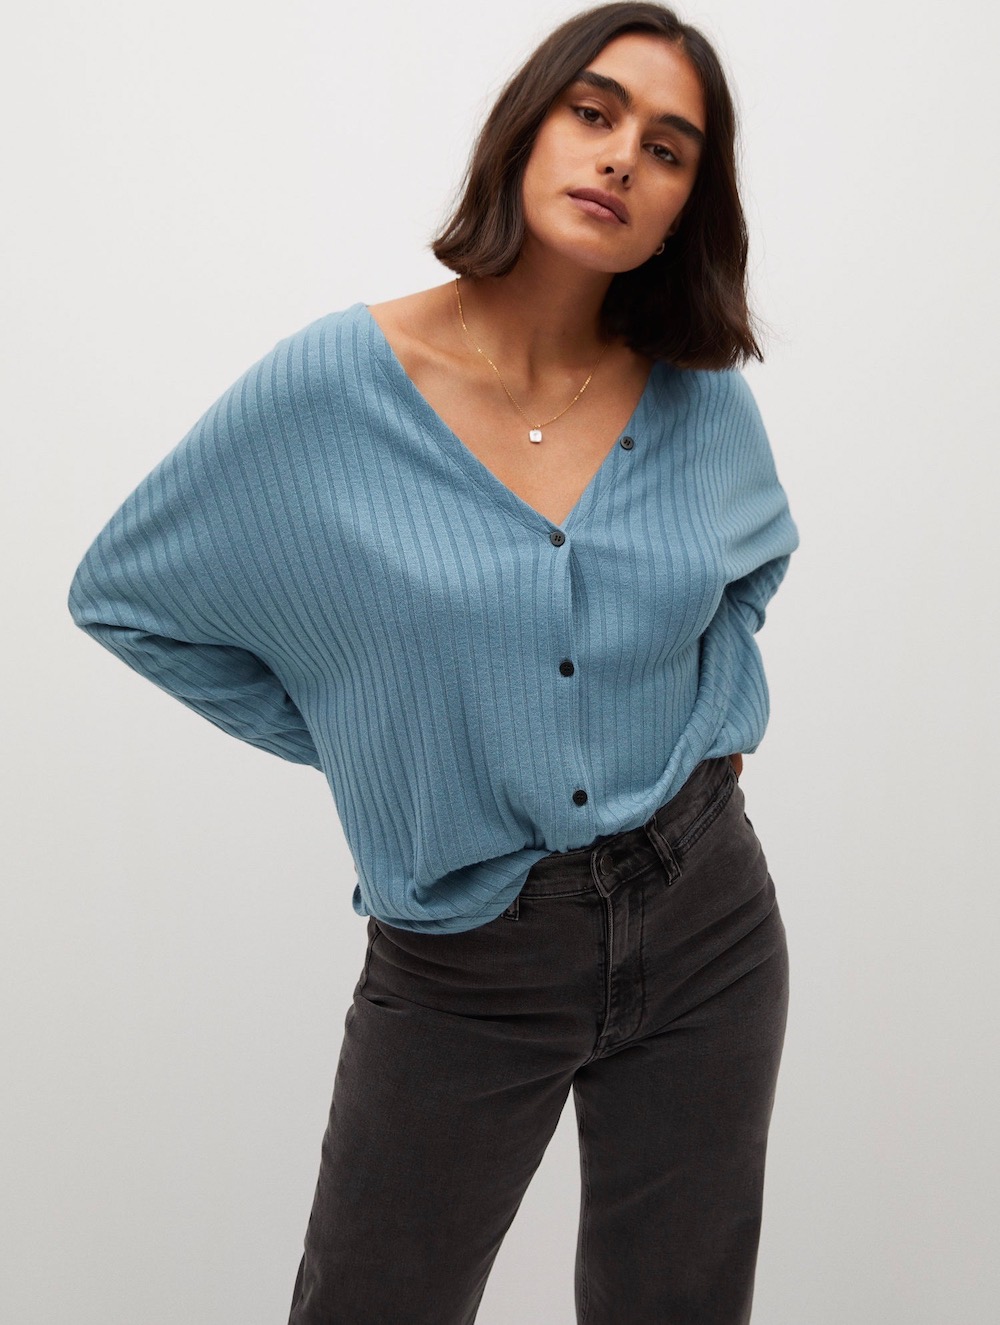 Fall 2020 Fashion Finds Under $100 - theFashionSpot